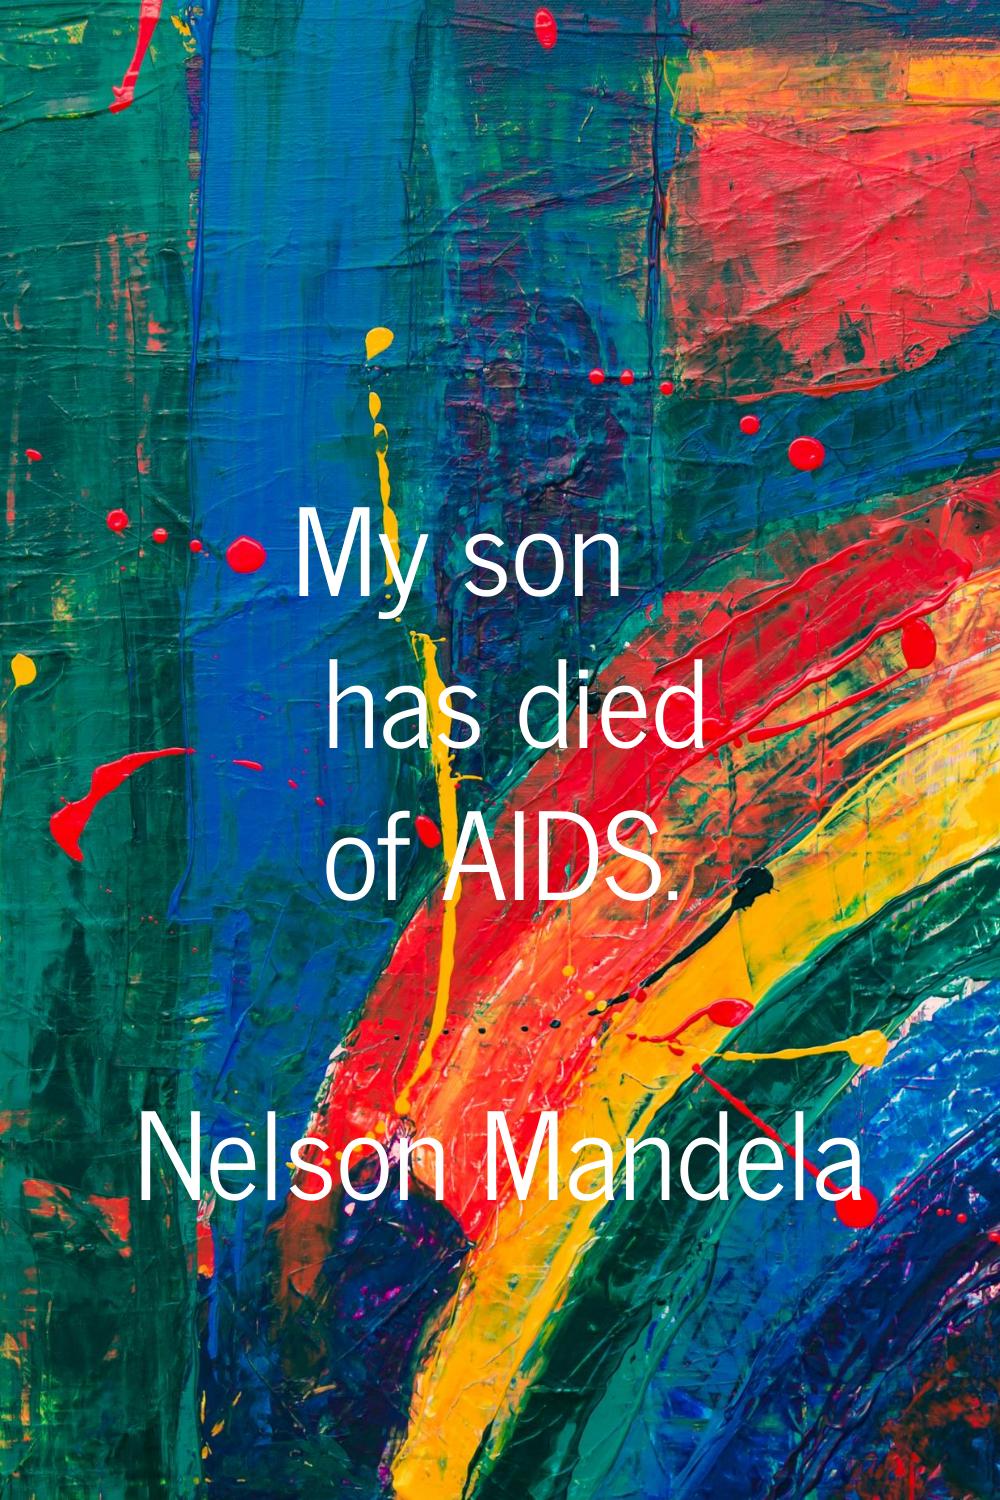 My son has died of AIDS.